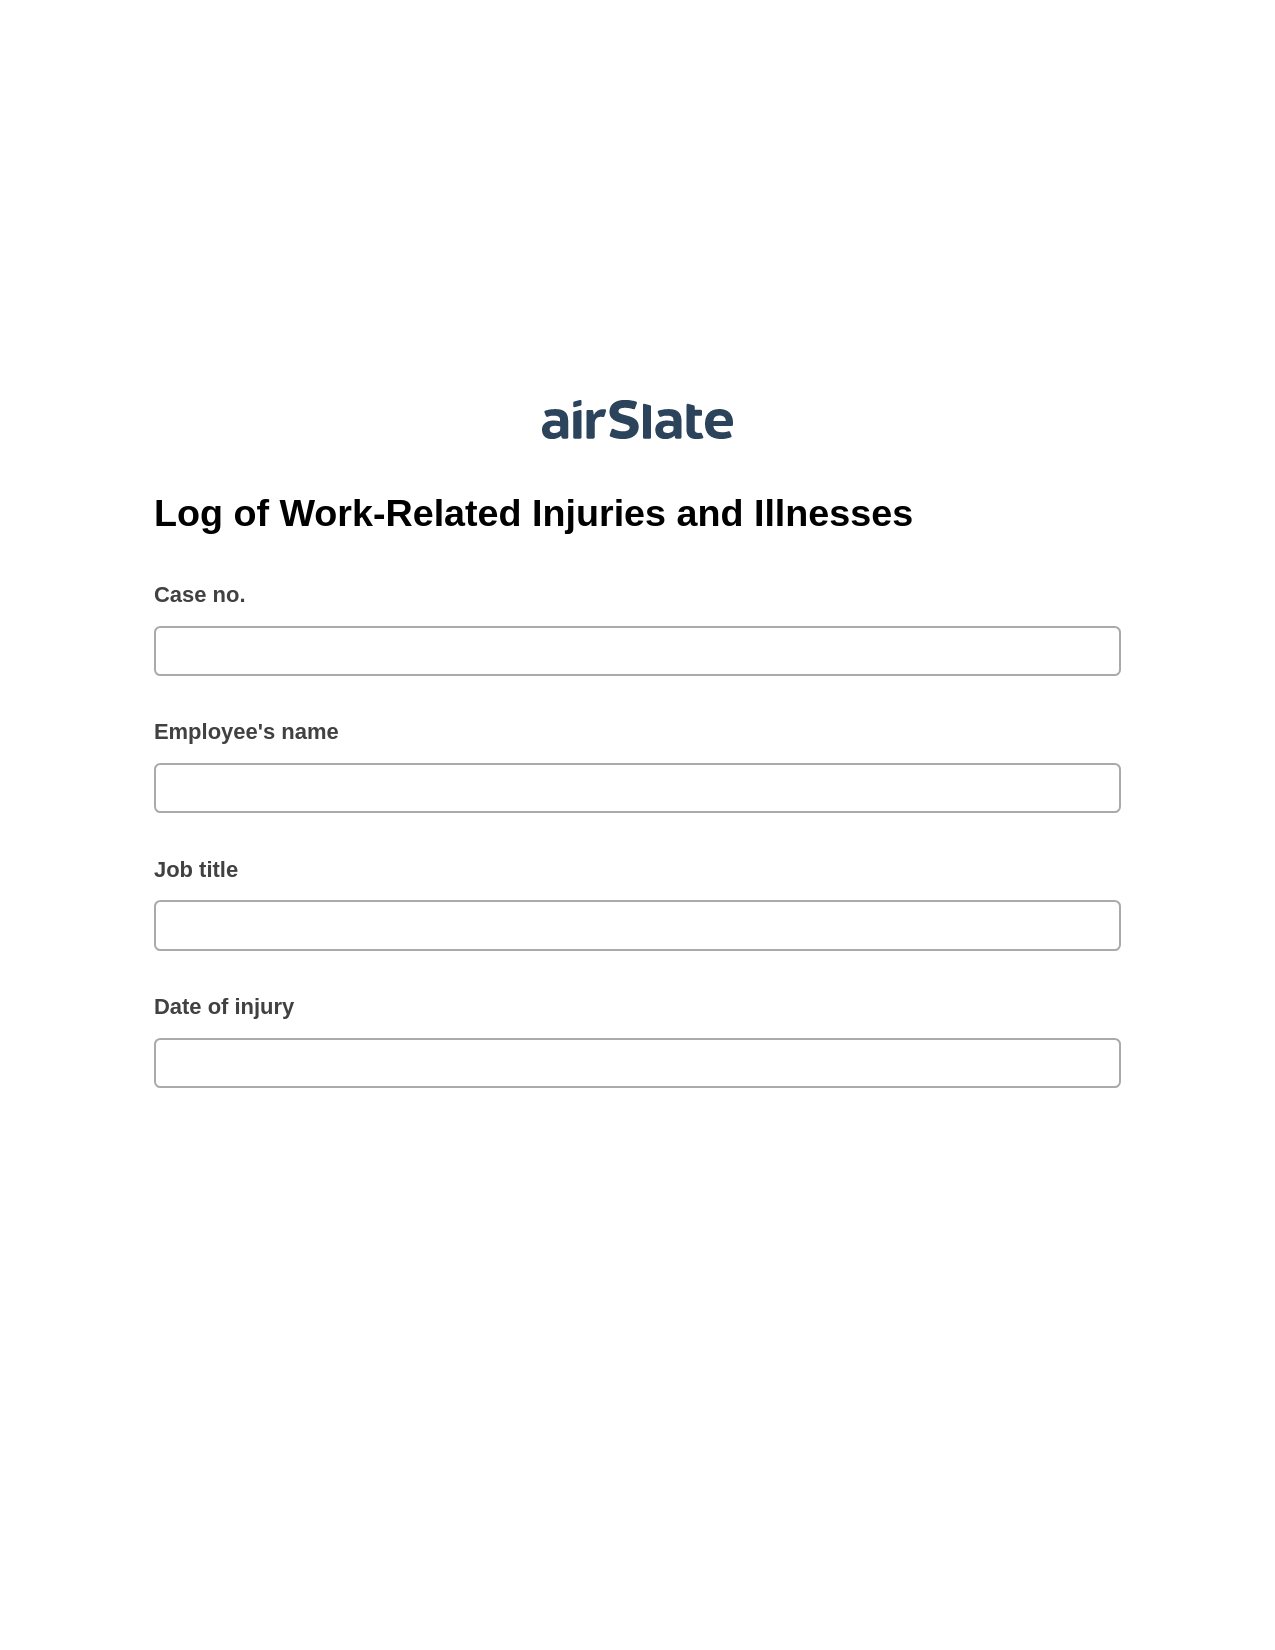 Log of Work-Related Injuries and Illnesses Pre-fill from another Slate Bot, Create slate addon, Export to NetSuite Record Bot